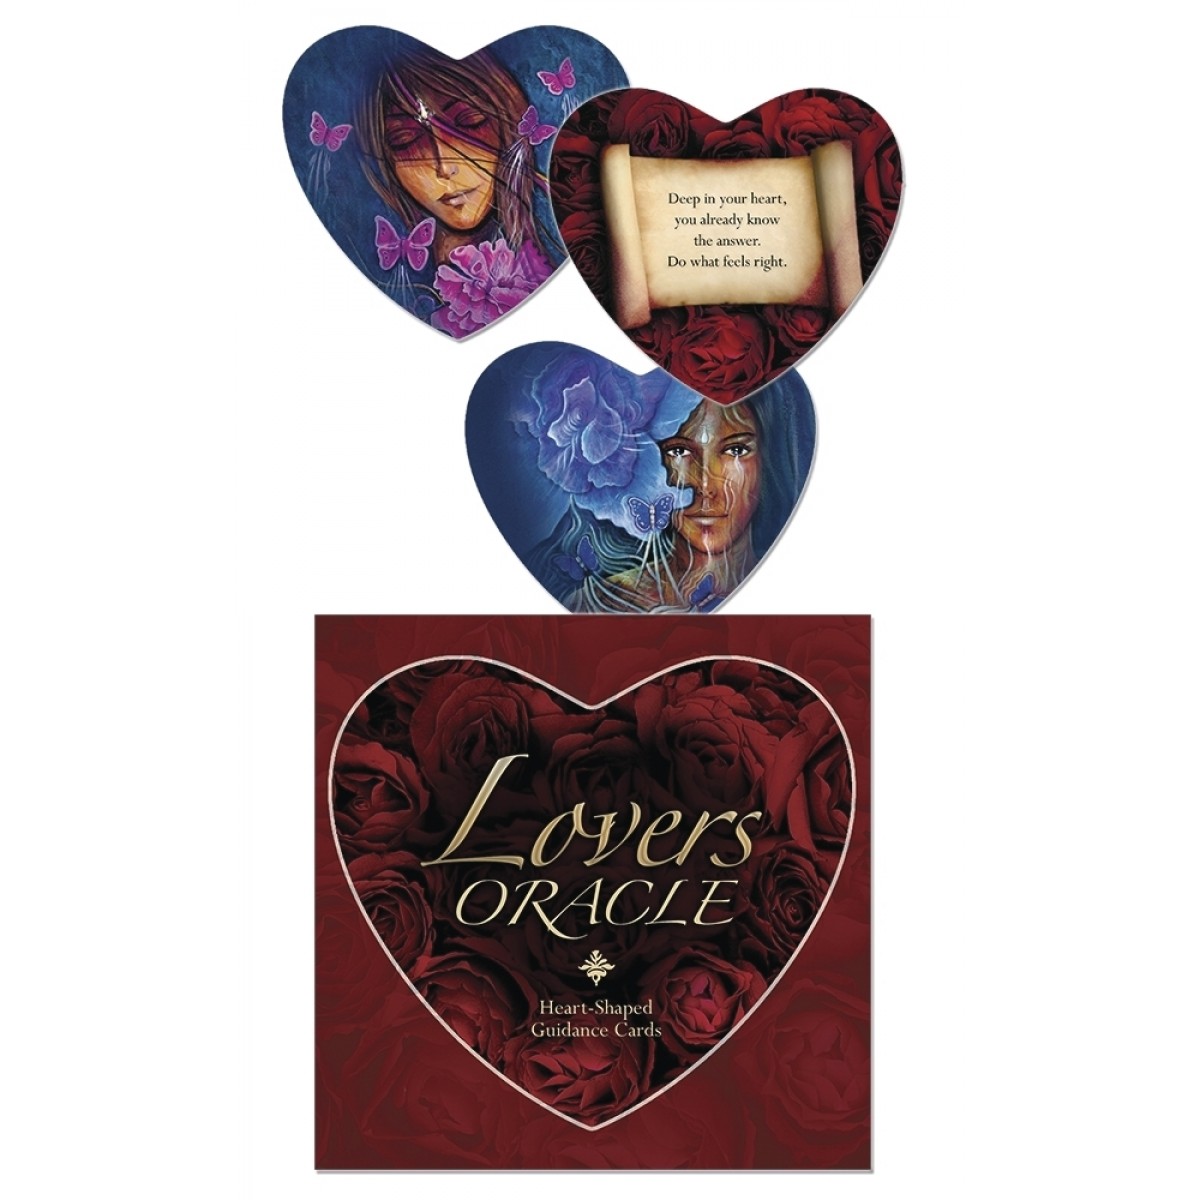 Lovers Oracle Cards 9780738743707 1200x1200 